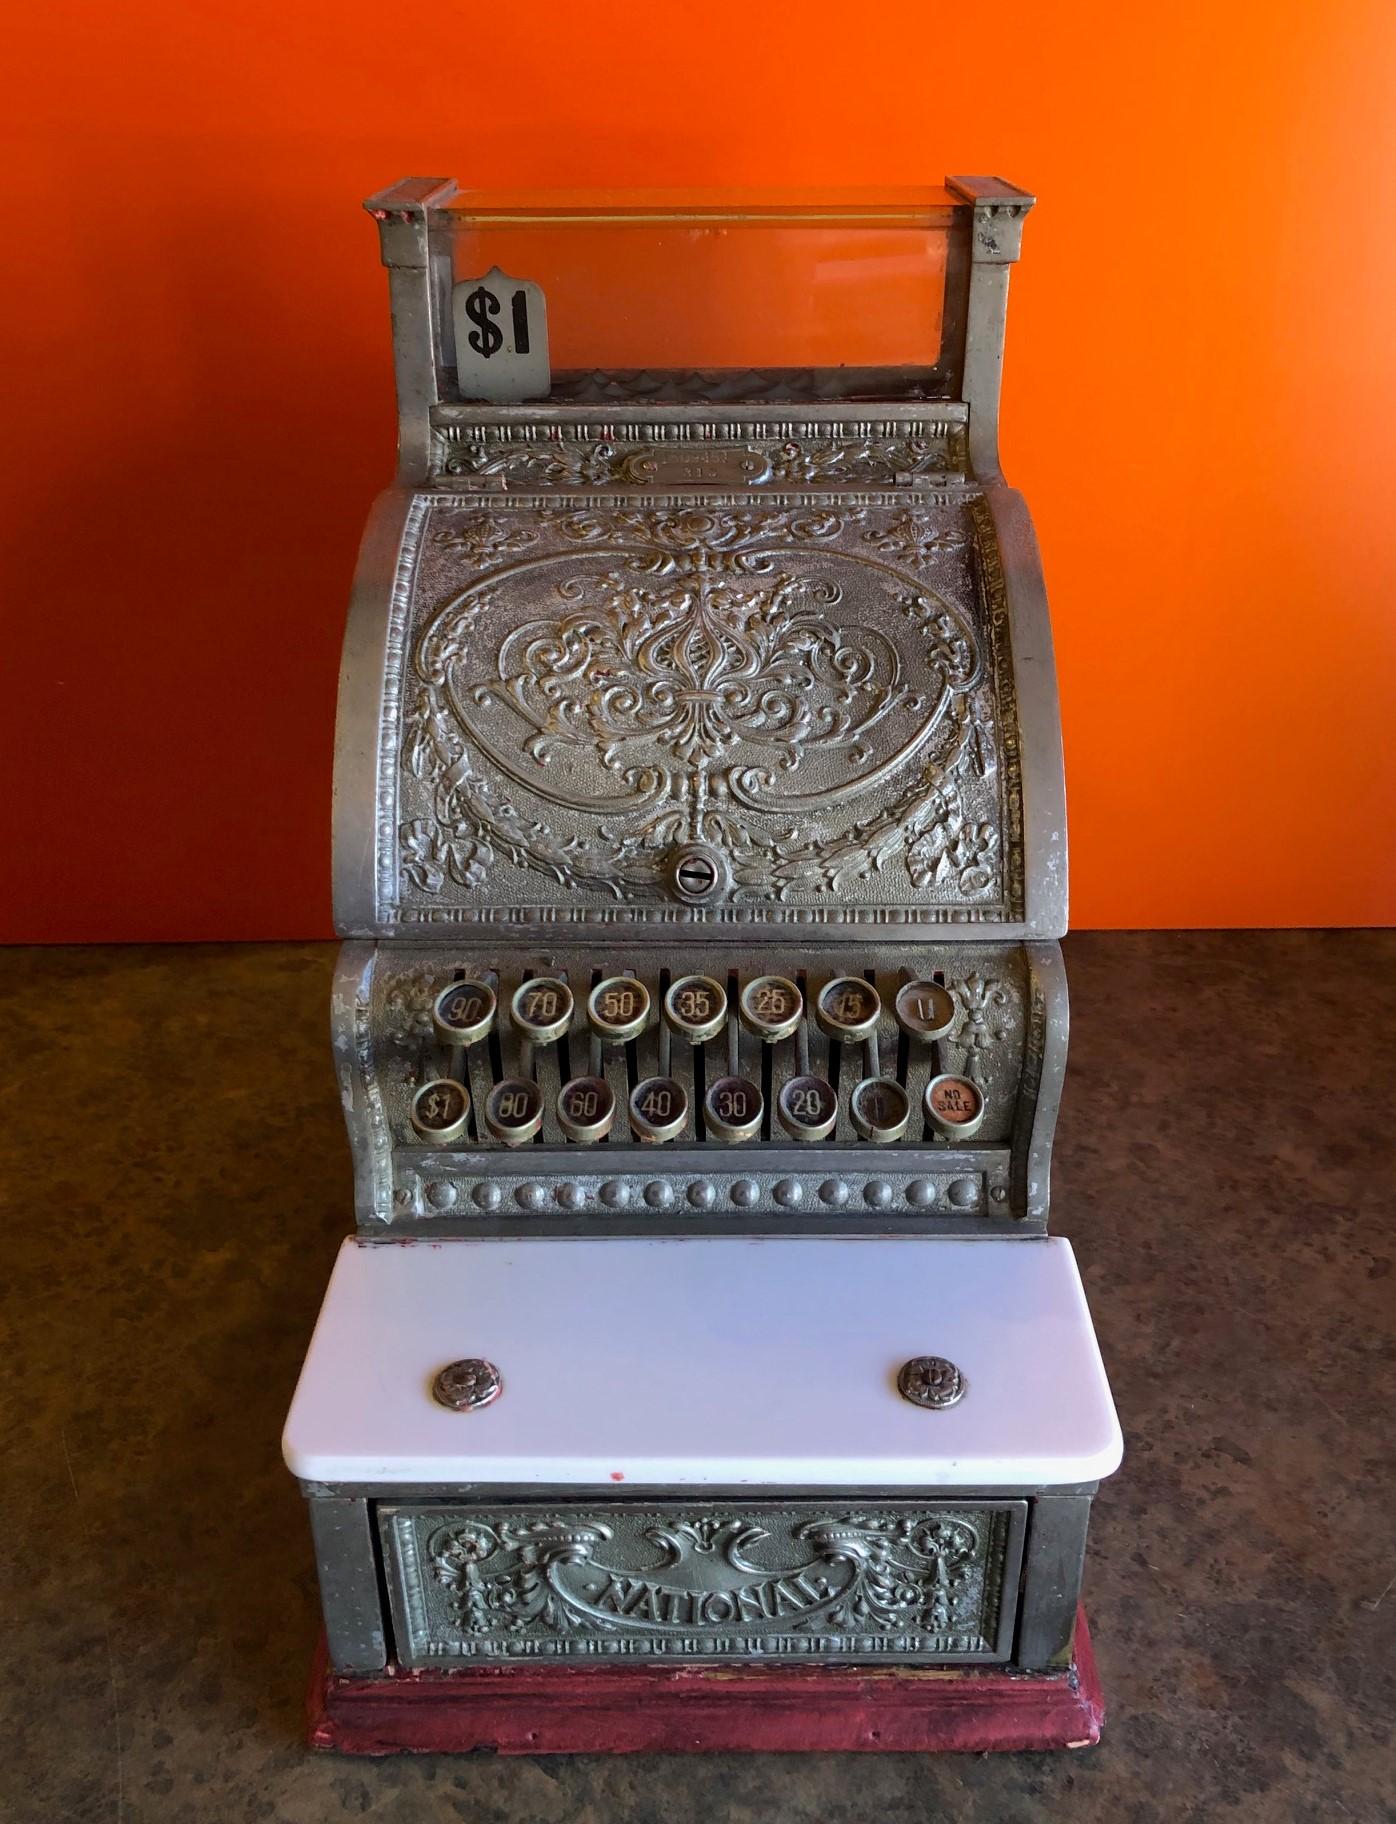 Antique model #313 cash register by National Cash Register (NCR), circa 1915.

The register is nickel plated brass in a very ornate pattern with a white marble shelf in very good condition. This is a beautiful register and was probably in a candy